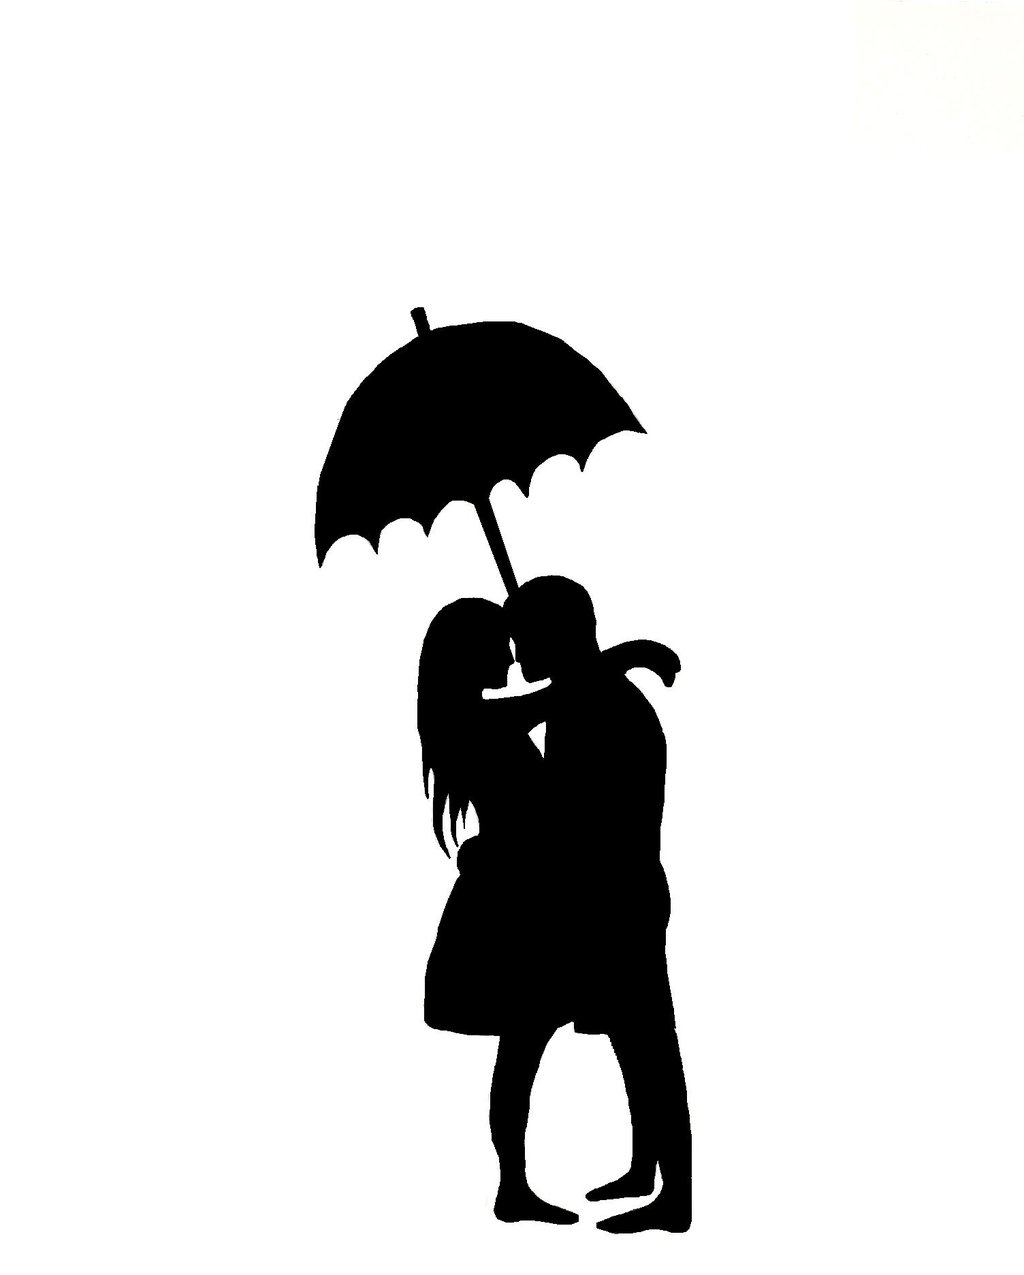 Man And Woman Silhouette By Katiecroo On Deviantart